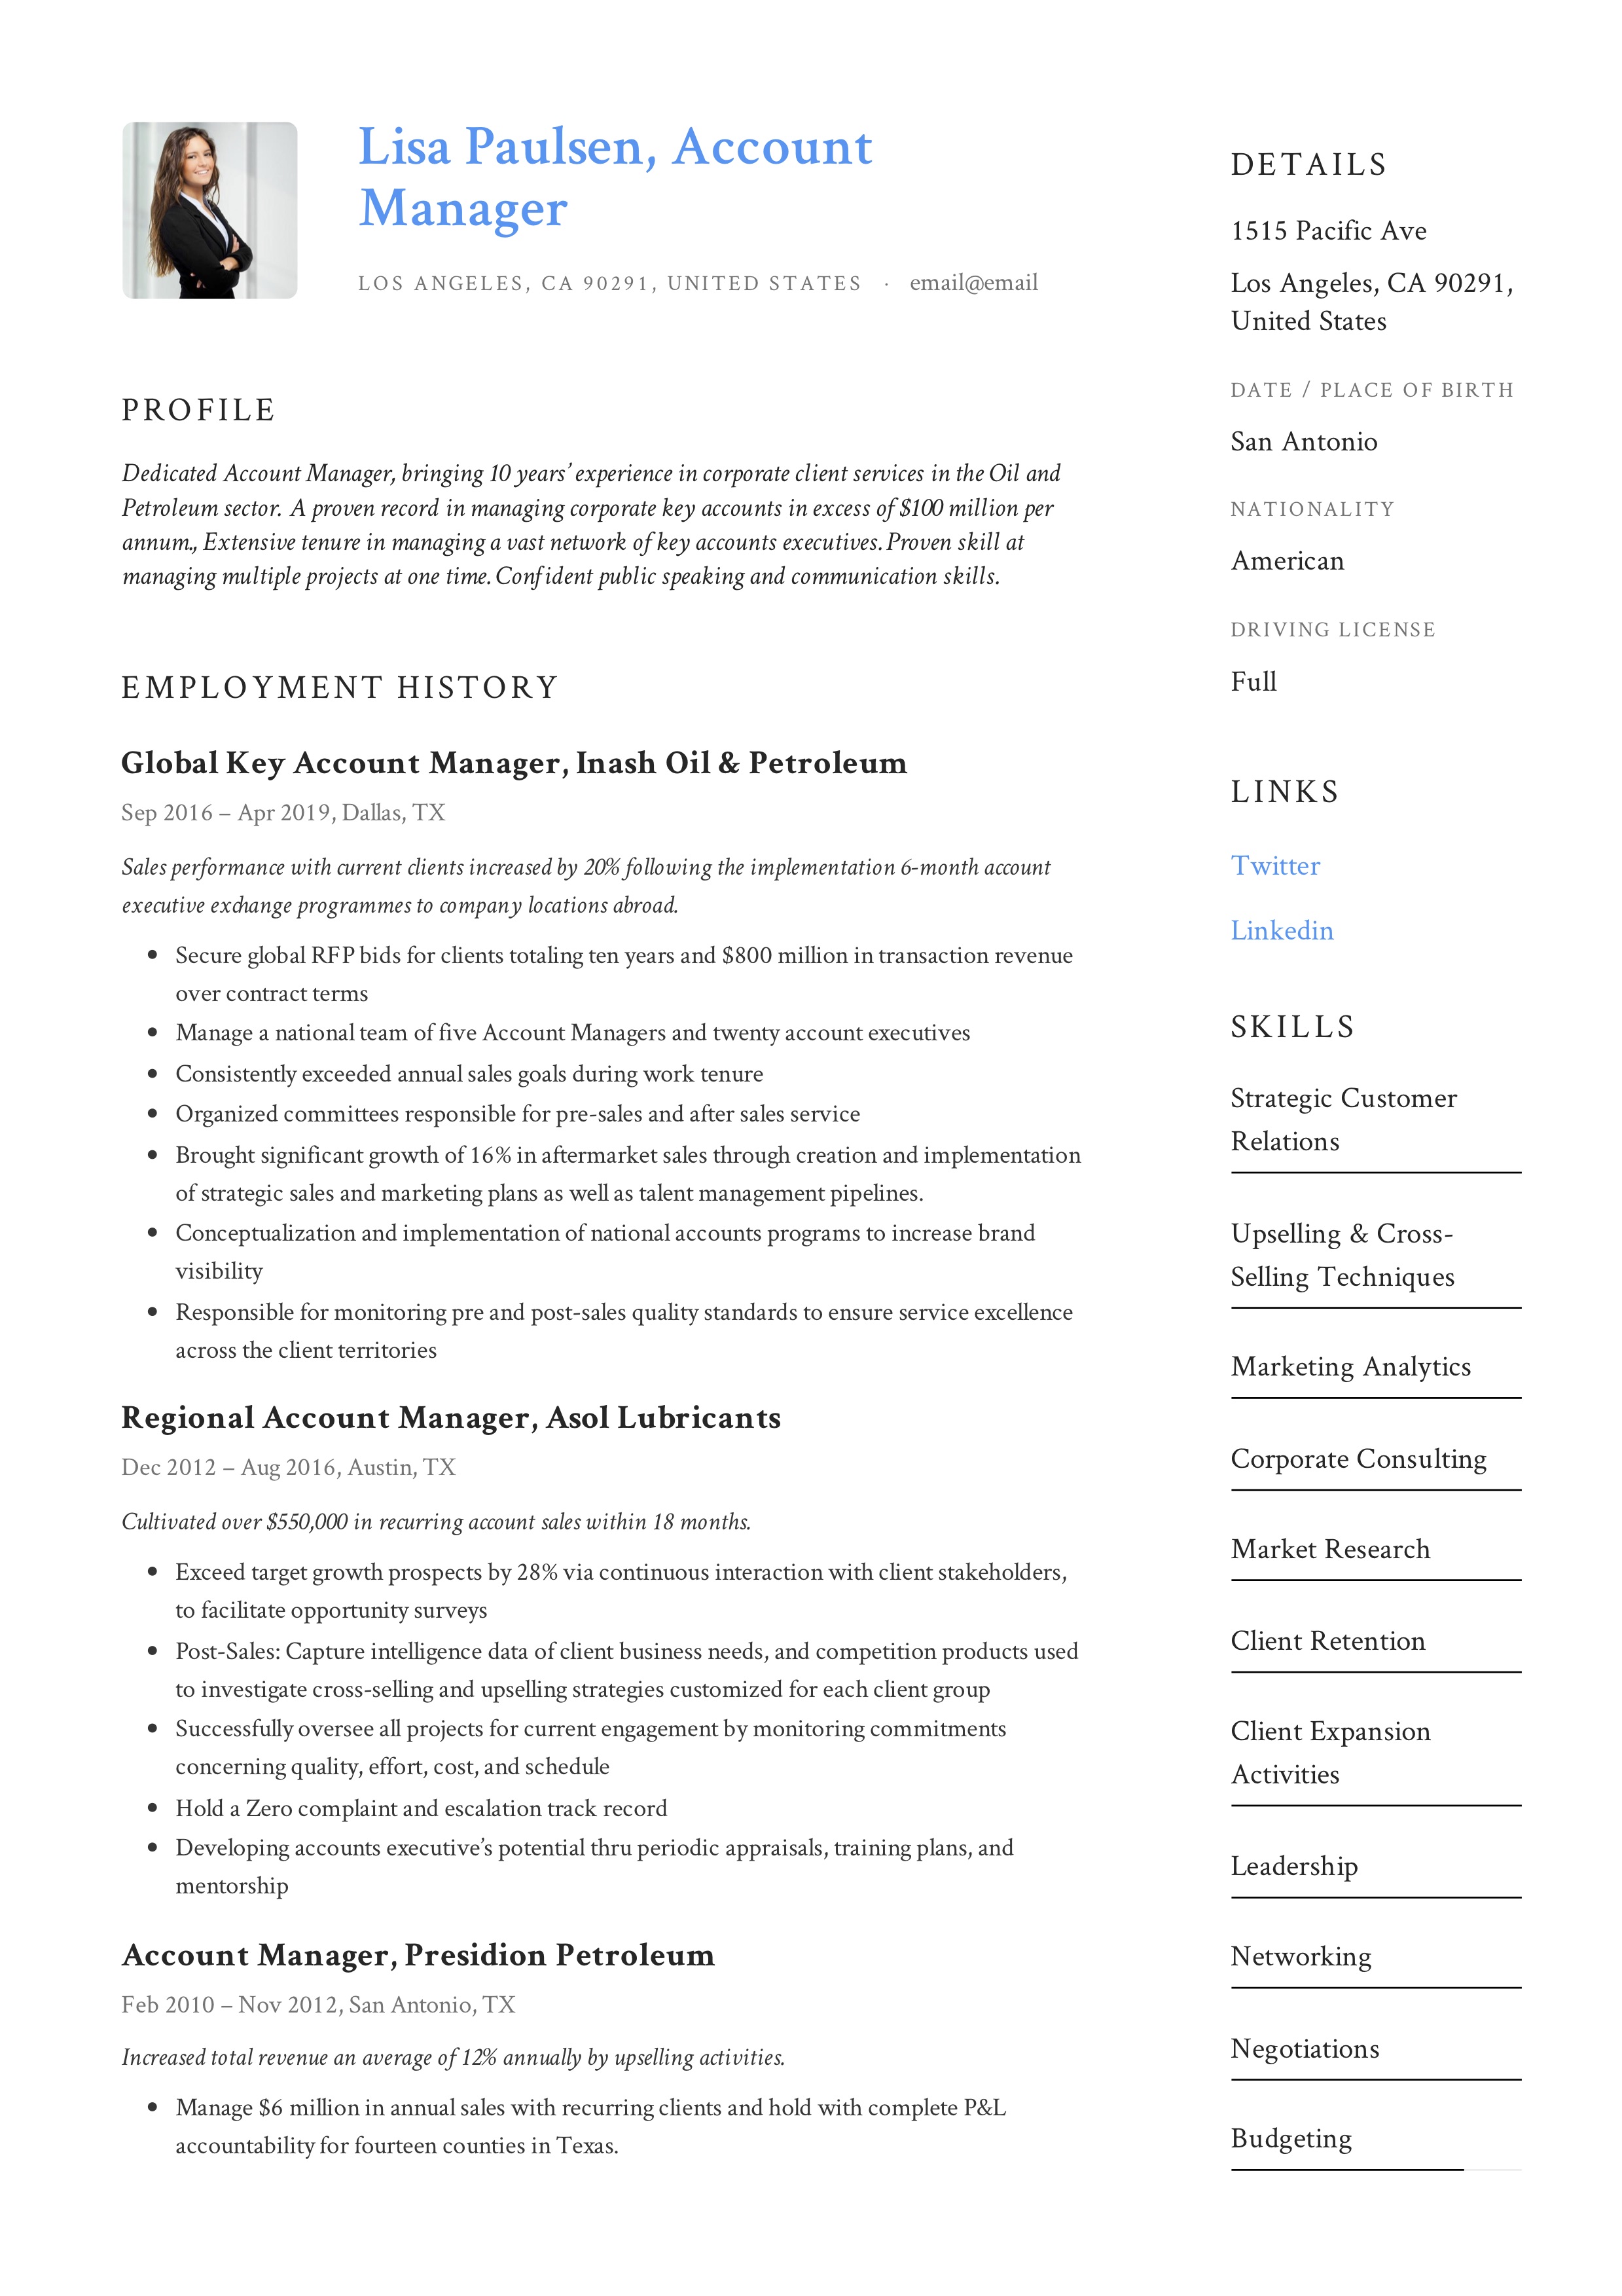 Account manager resume example